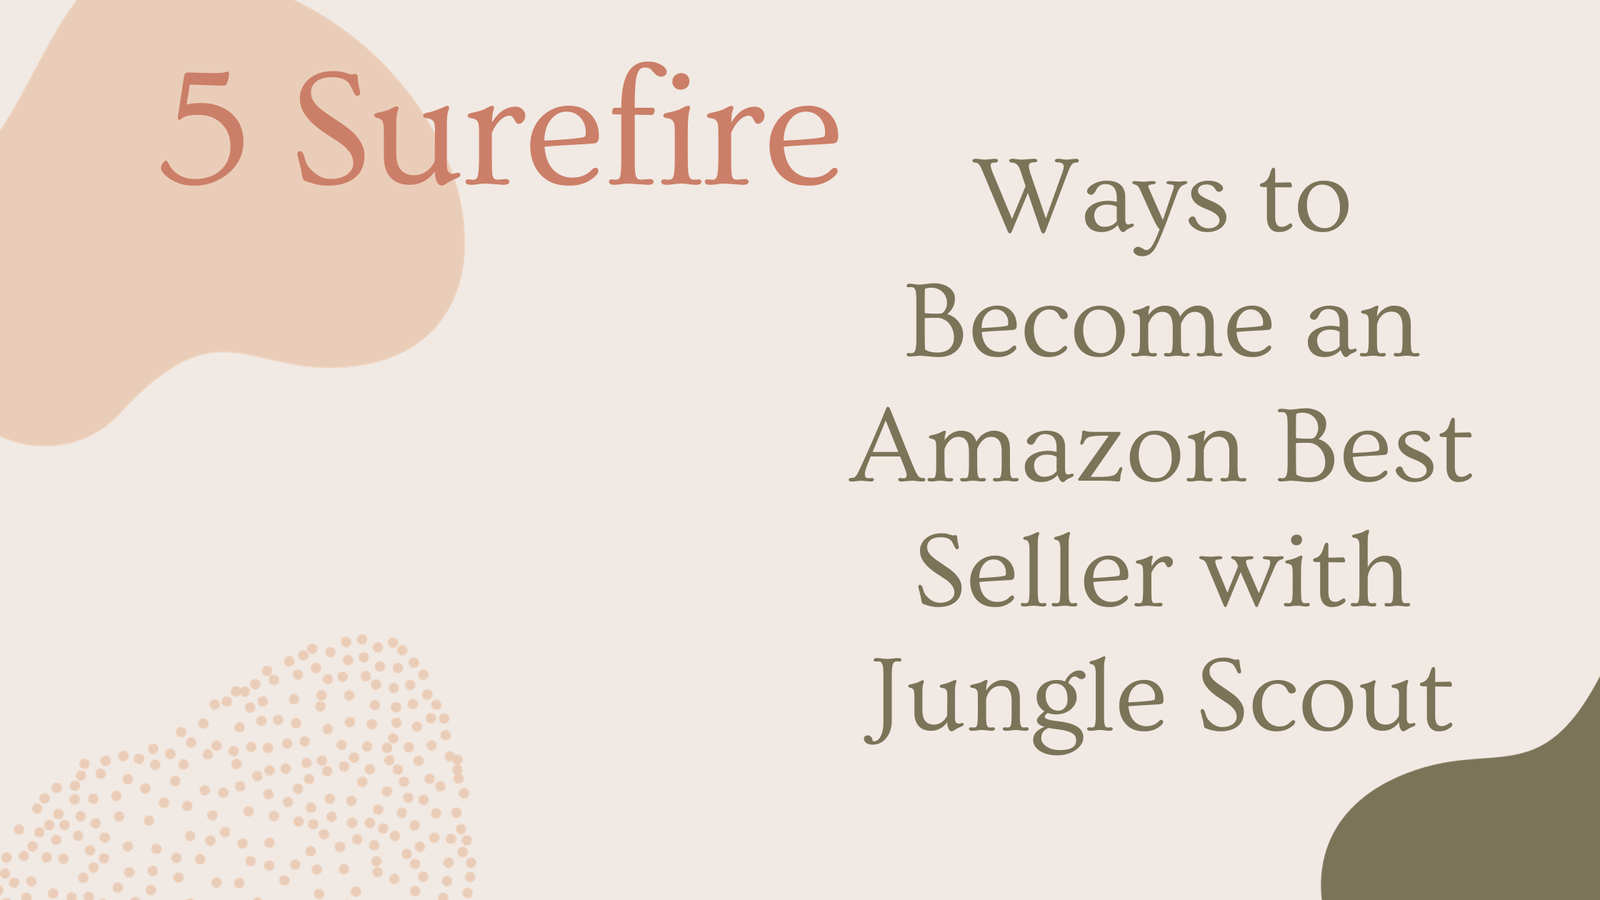 5 Surefire ways to Become an Amazon Best Seller with Jungle Scout